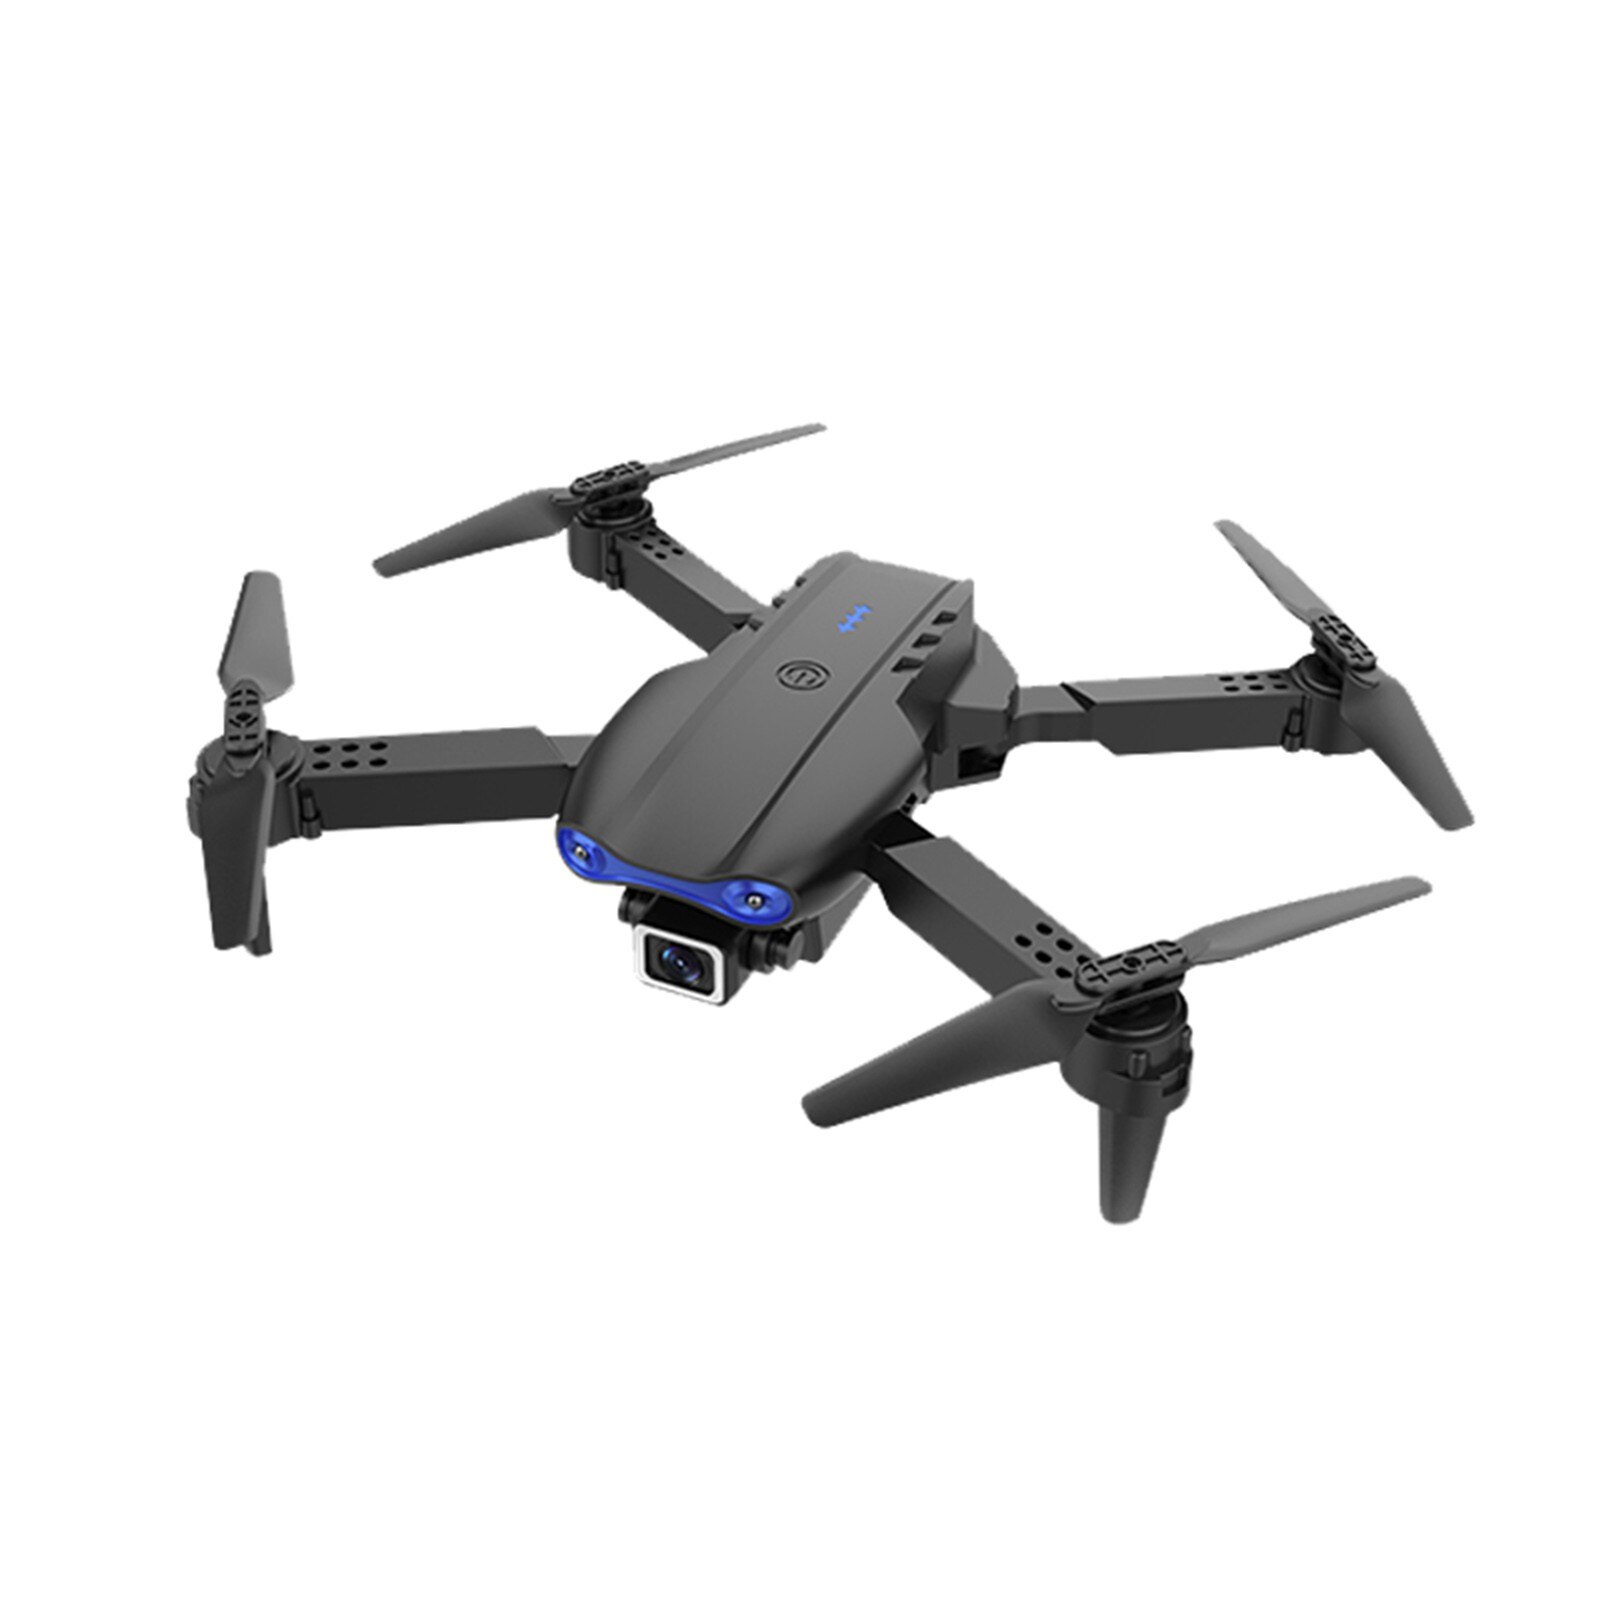 Mini-drone 4k Hd Dual Camera Wifi Fpv Smart Selfie Rc Uav Foldable Helicopter Profesional Photography Quadcopter Rc Dron Toys: Black 